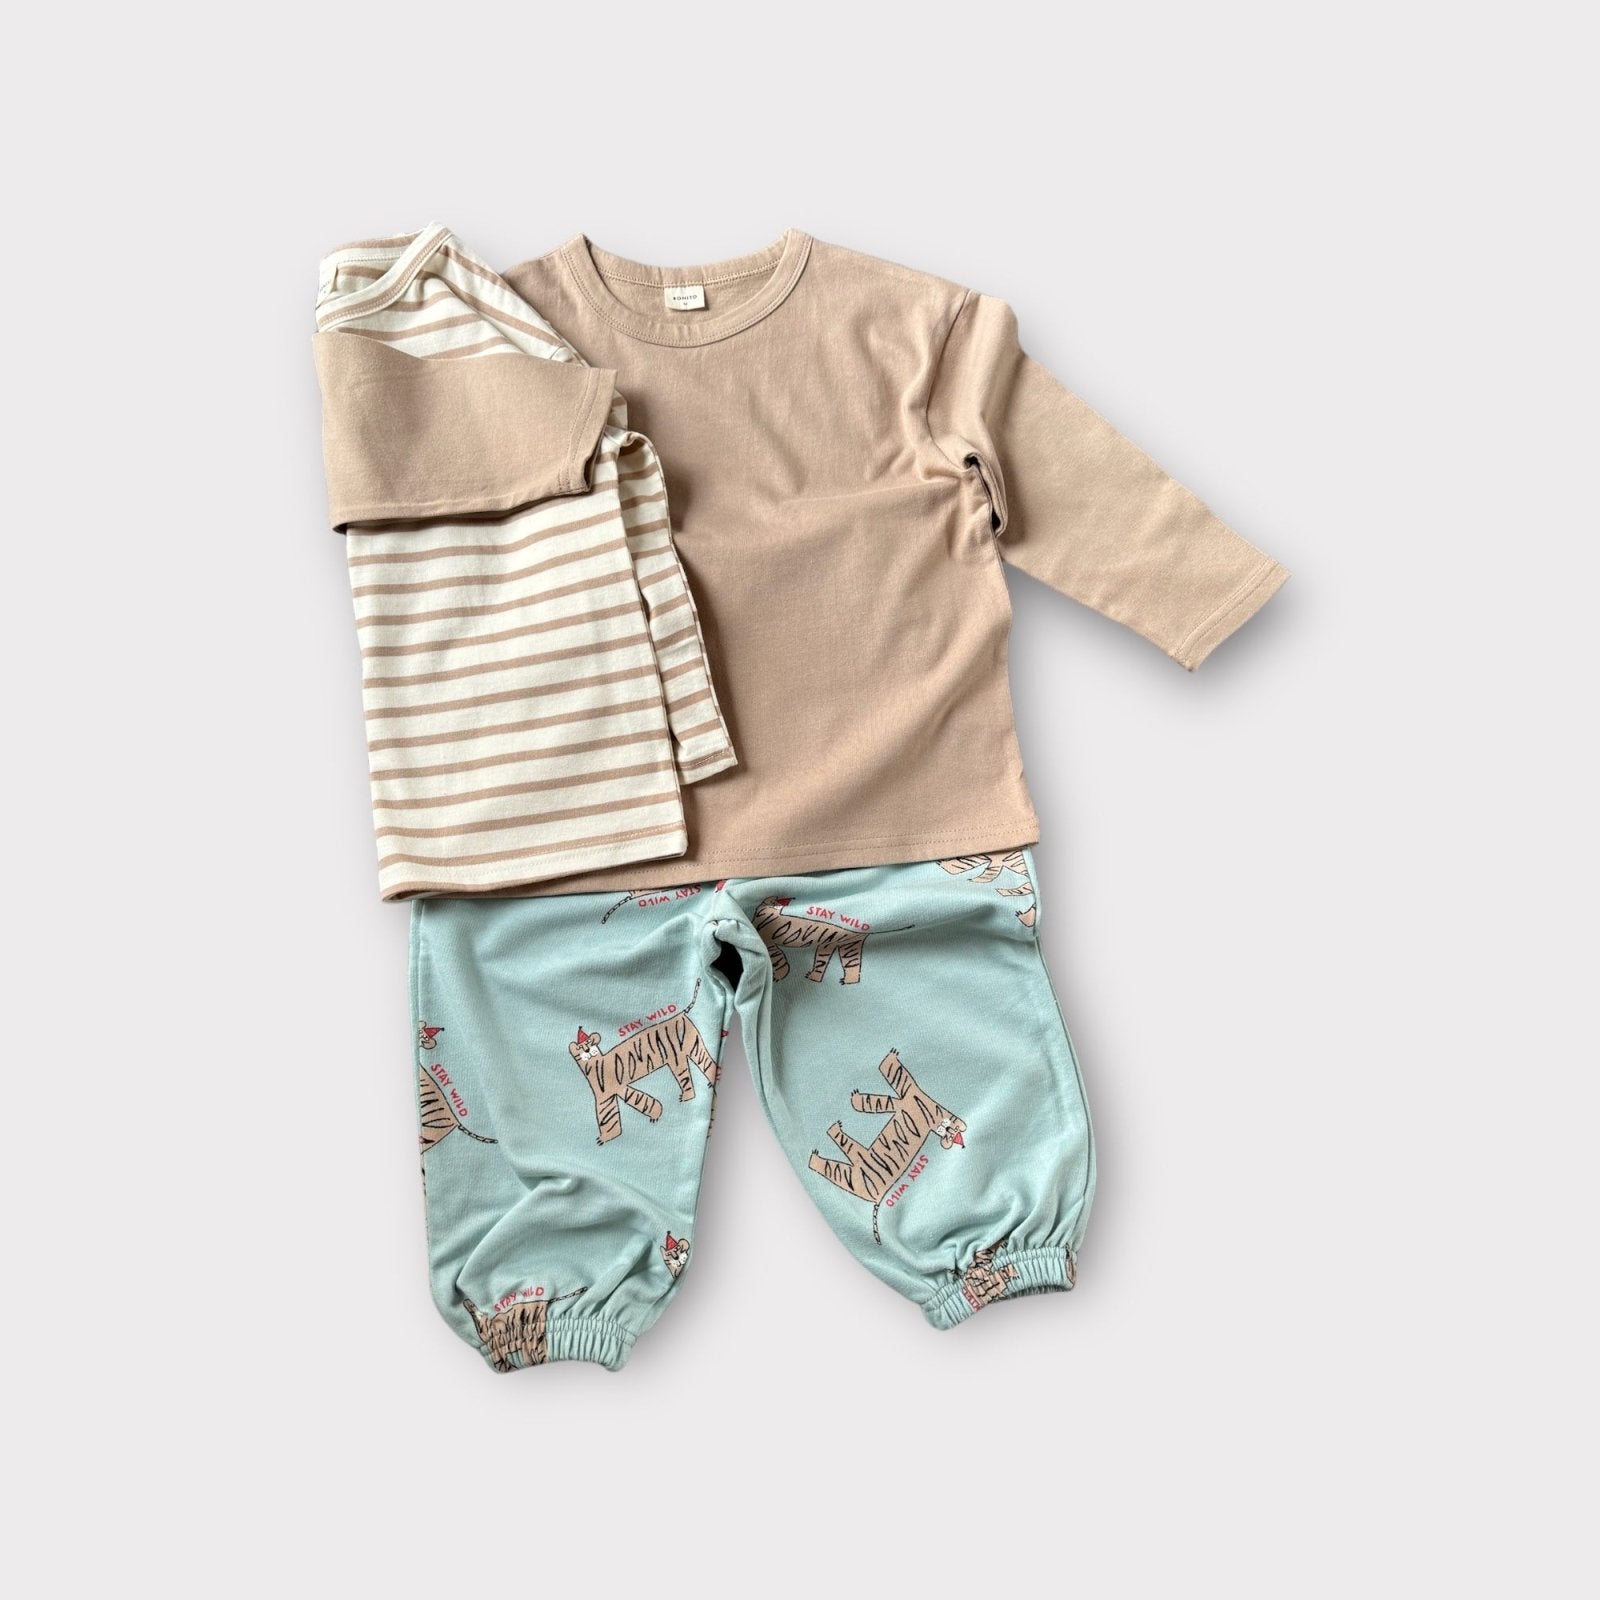 Stay Wild Pants find Stylish Fashion for Little People- at Little Foxx Concept Store